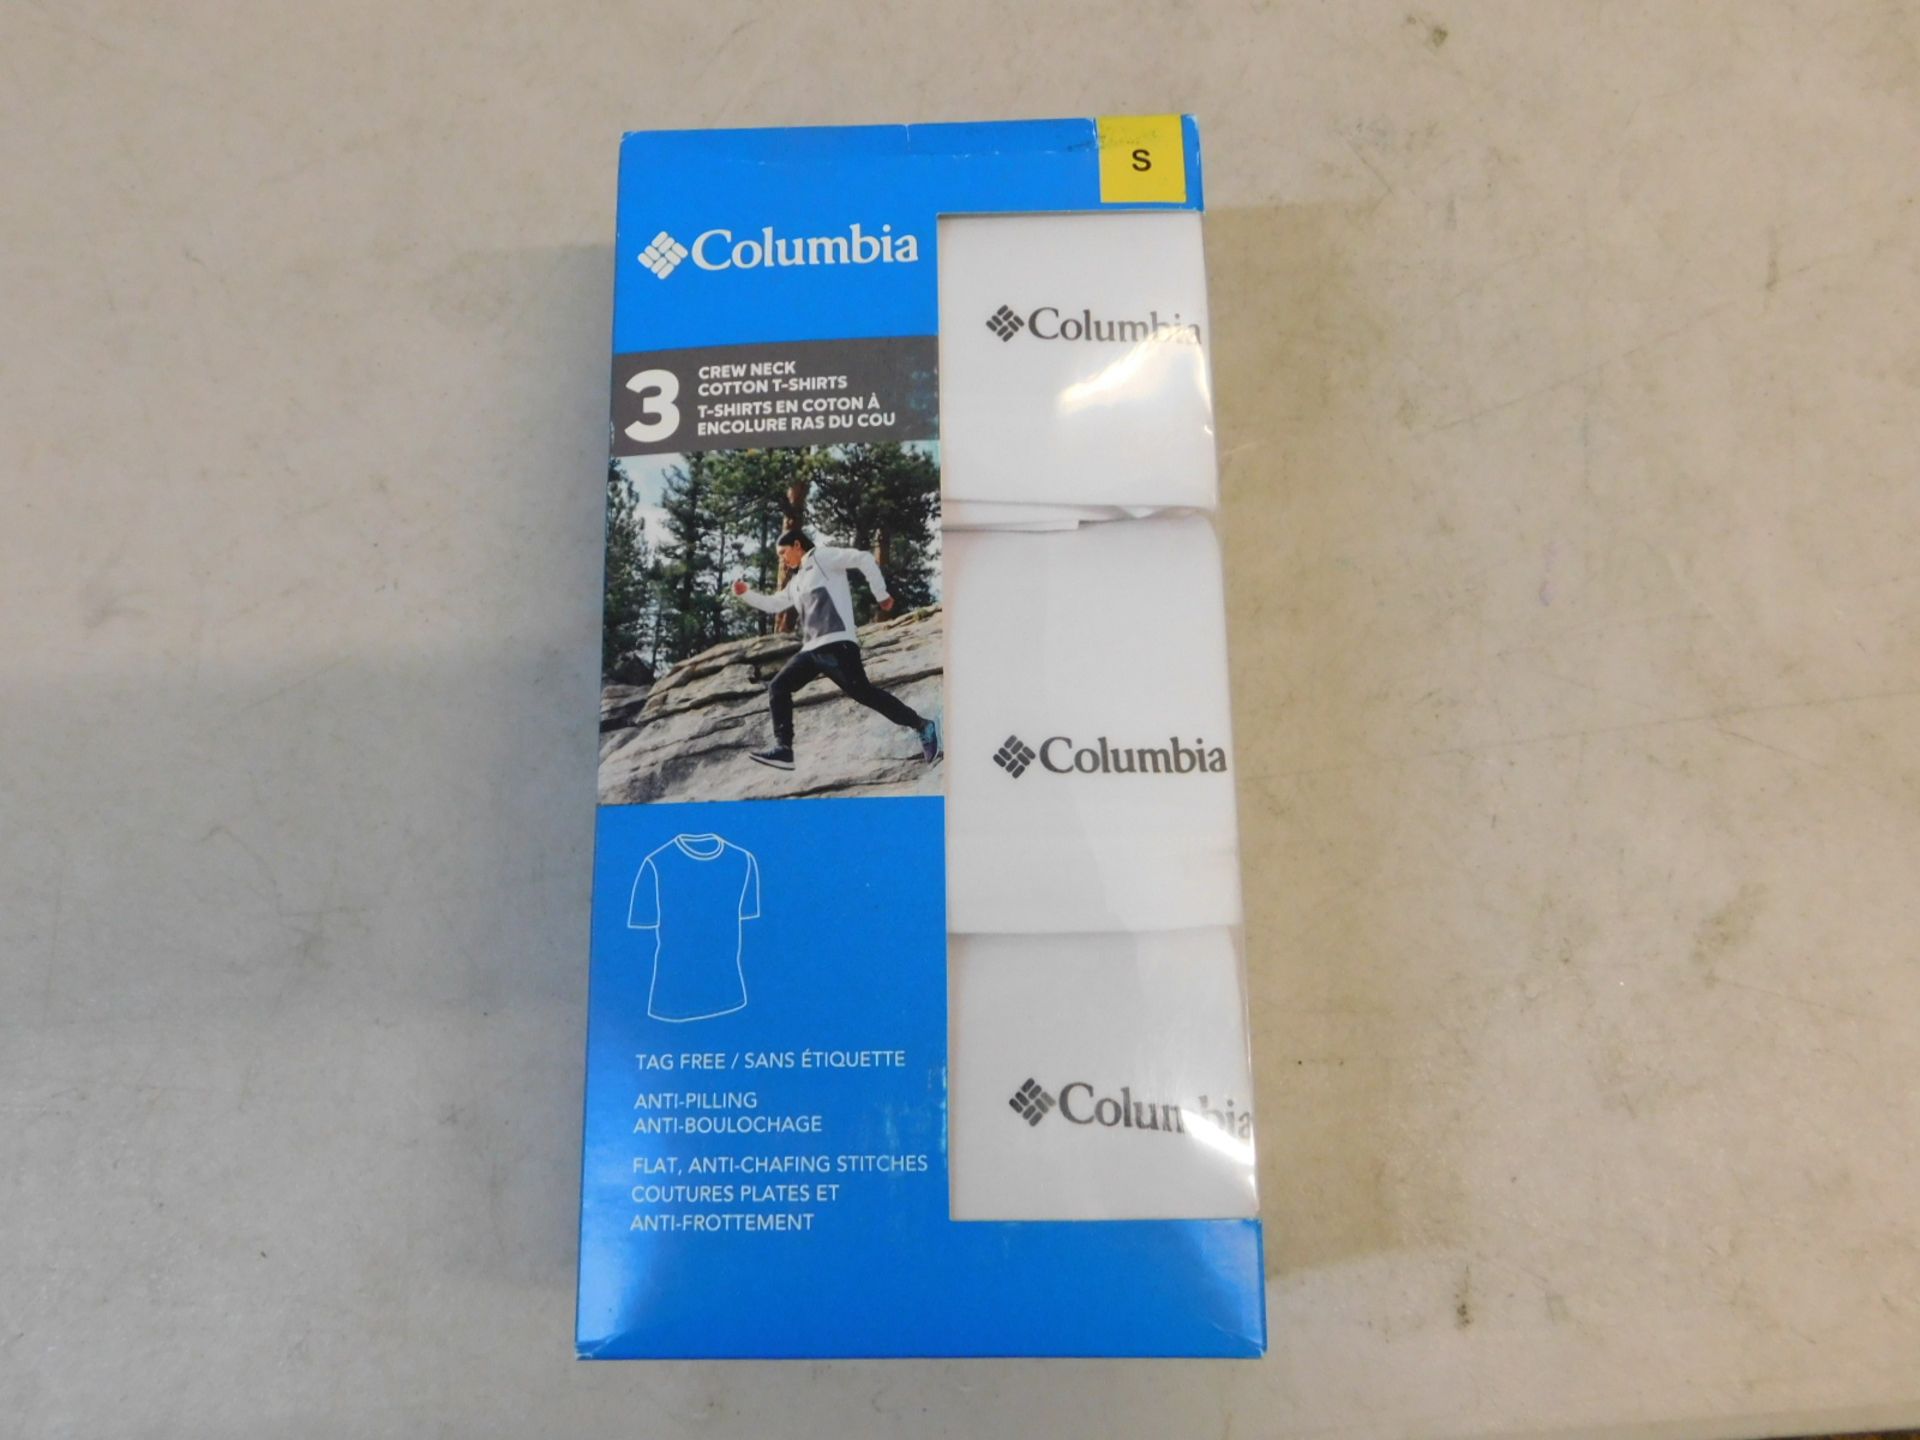 1 BRAND NEW BOXED COLUMBIA MEN'S 3-PACK SHORT SLEEVE CREW NECK COTTON T-SHIRTS IN WHITE SIZE S RRP